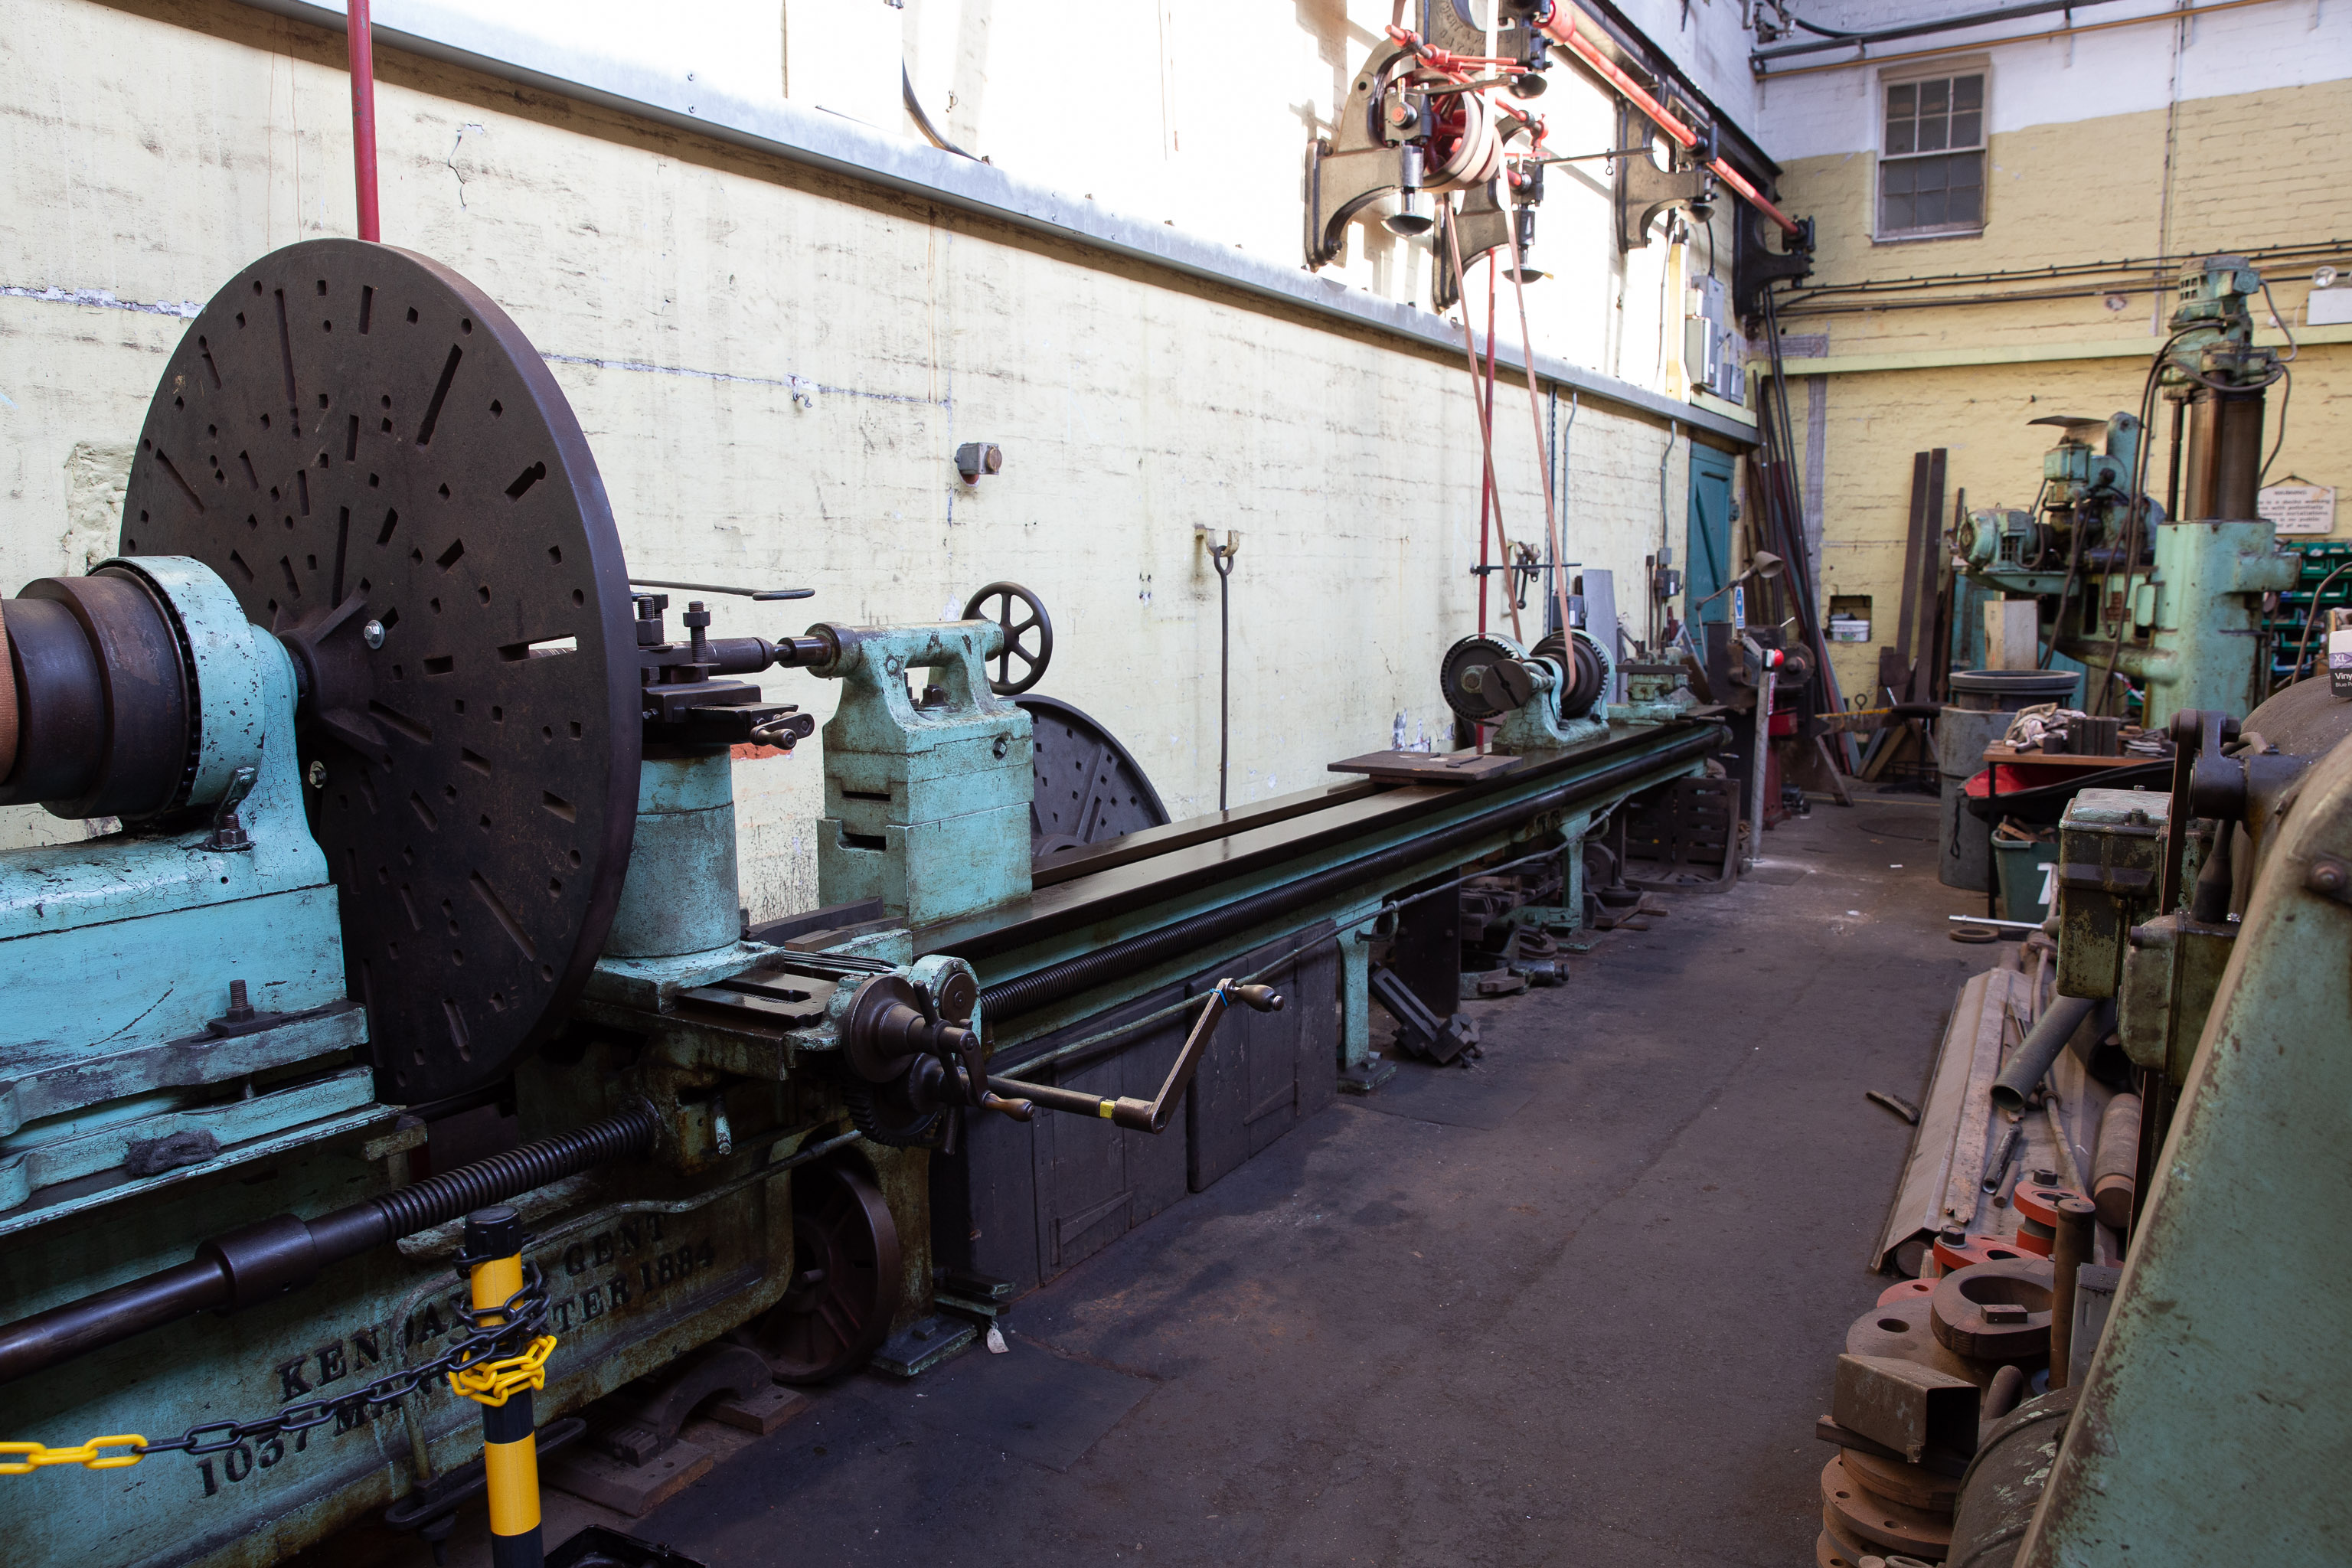 Lathe
I imagine this is the biggest lathe I've ever been in a room with.
